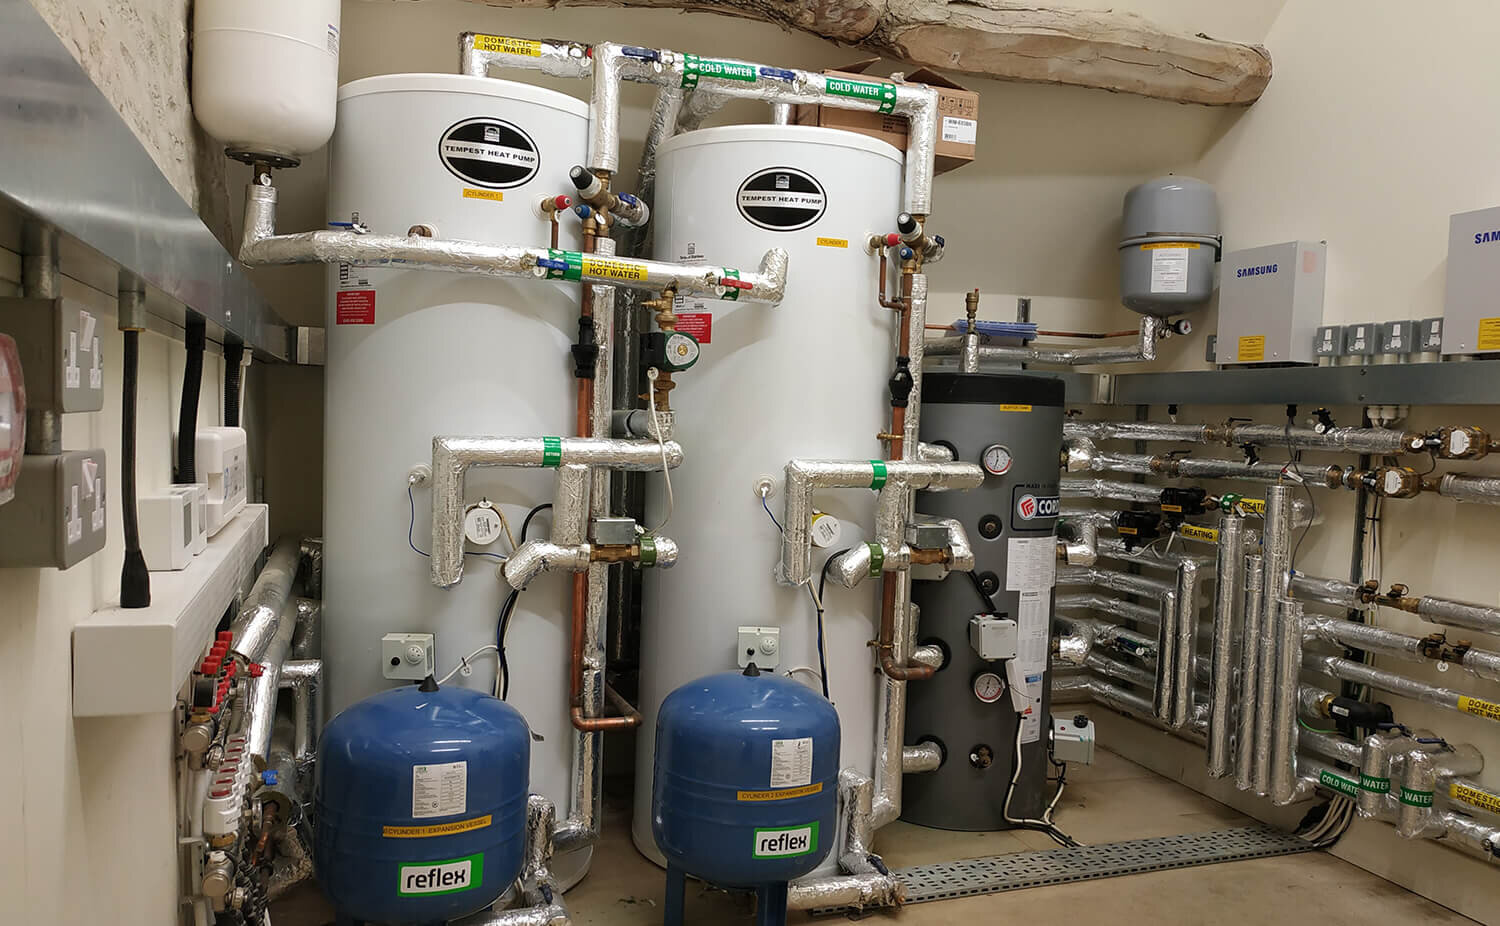 Tempest Heat Pump Hot Water Cylinders installed at Caswell House